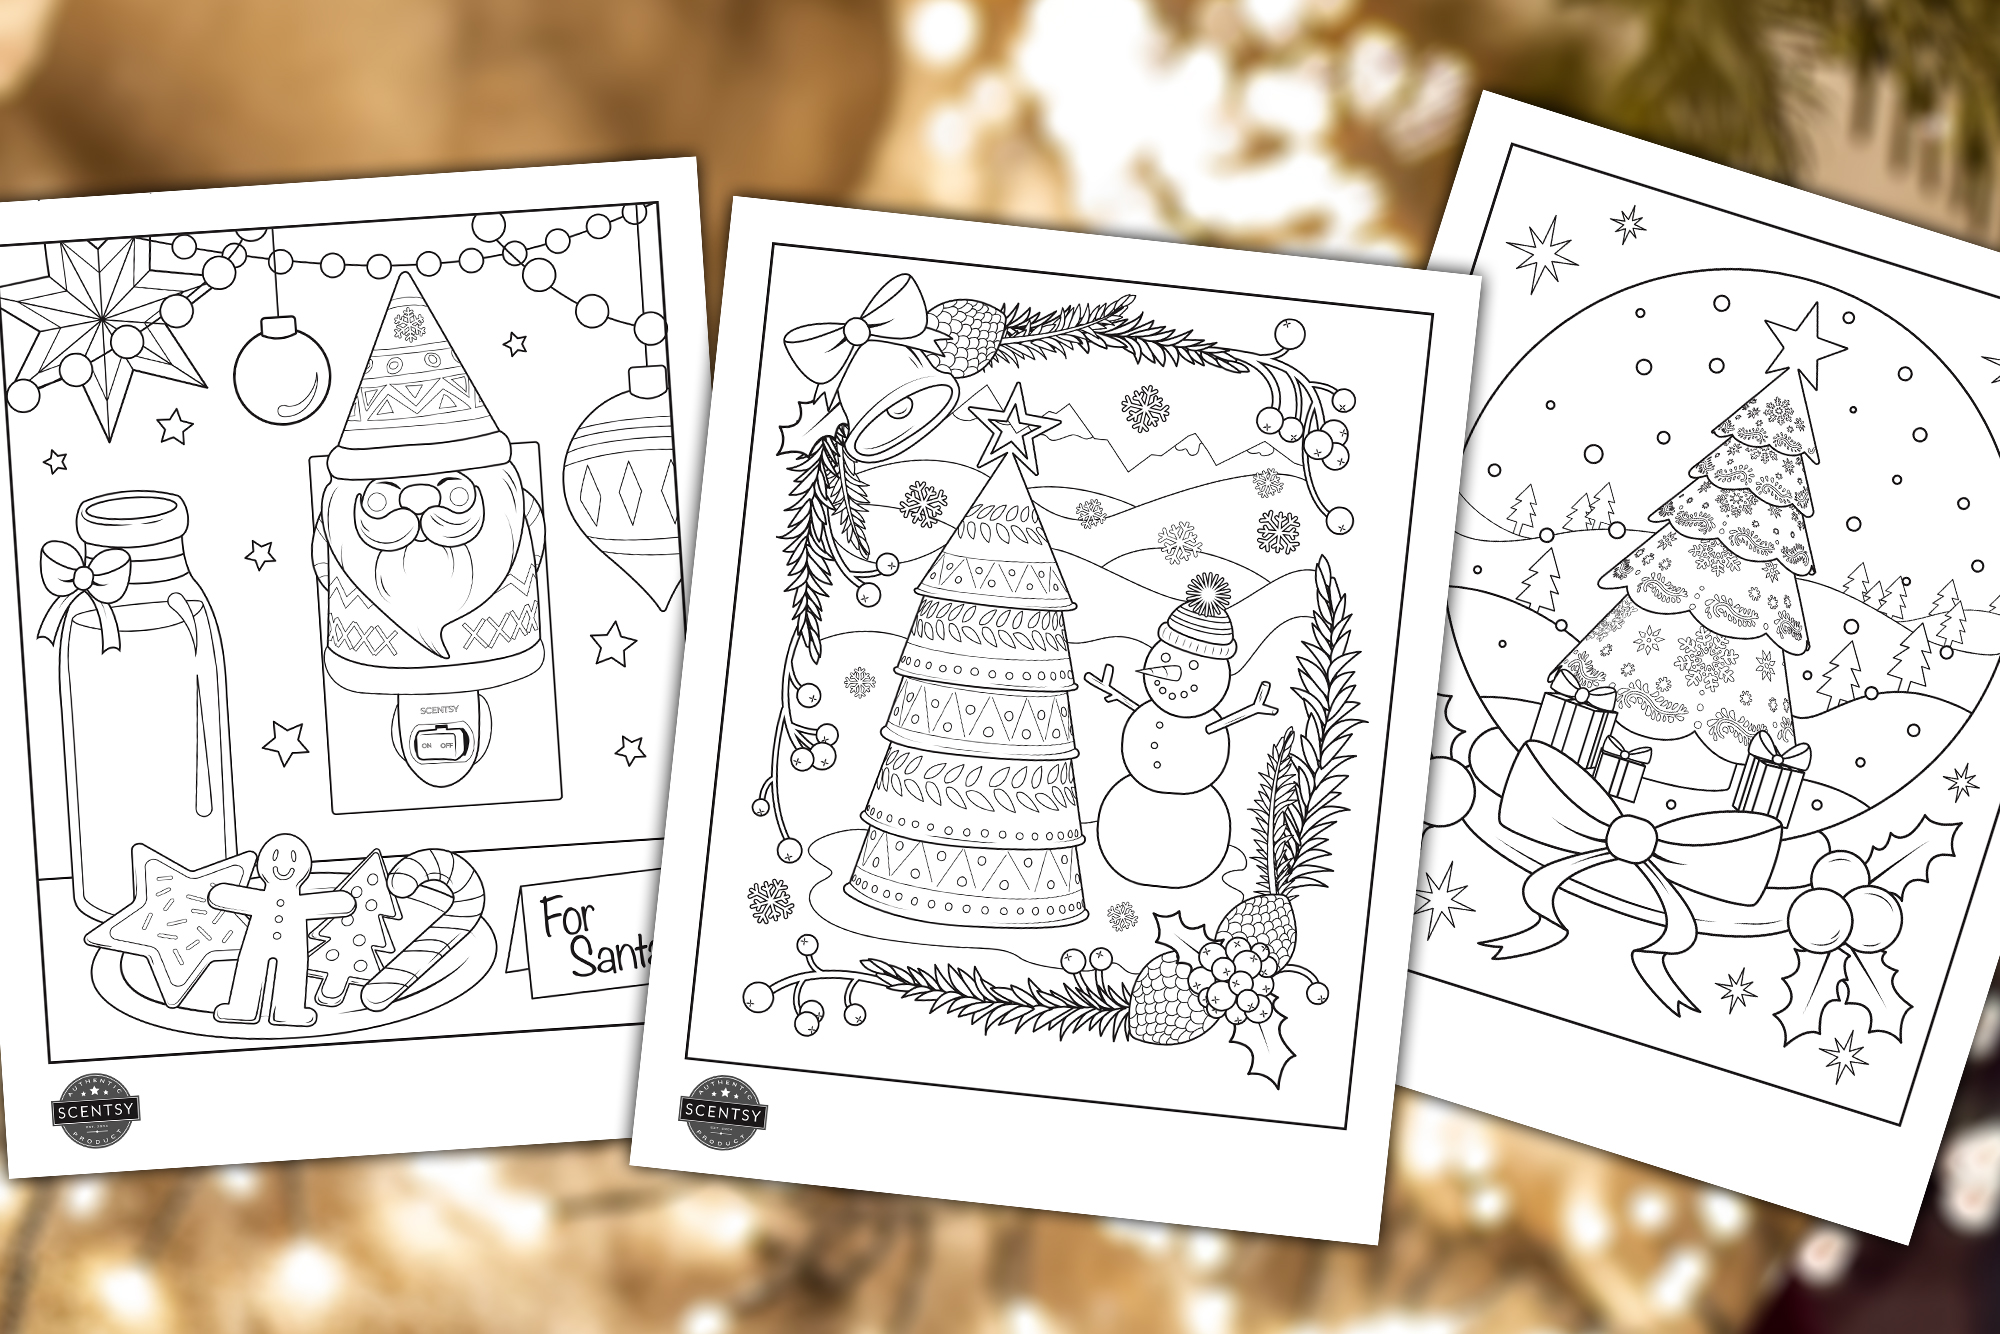 Brighten the holidays with Scentsy coloring pages